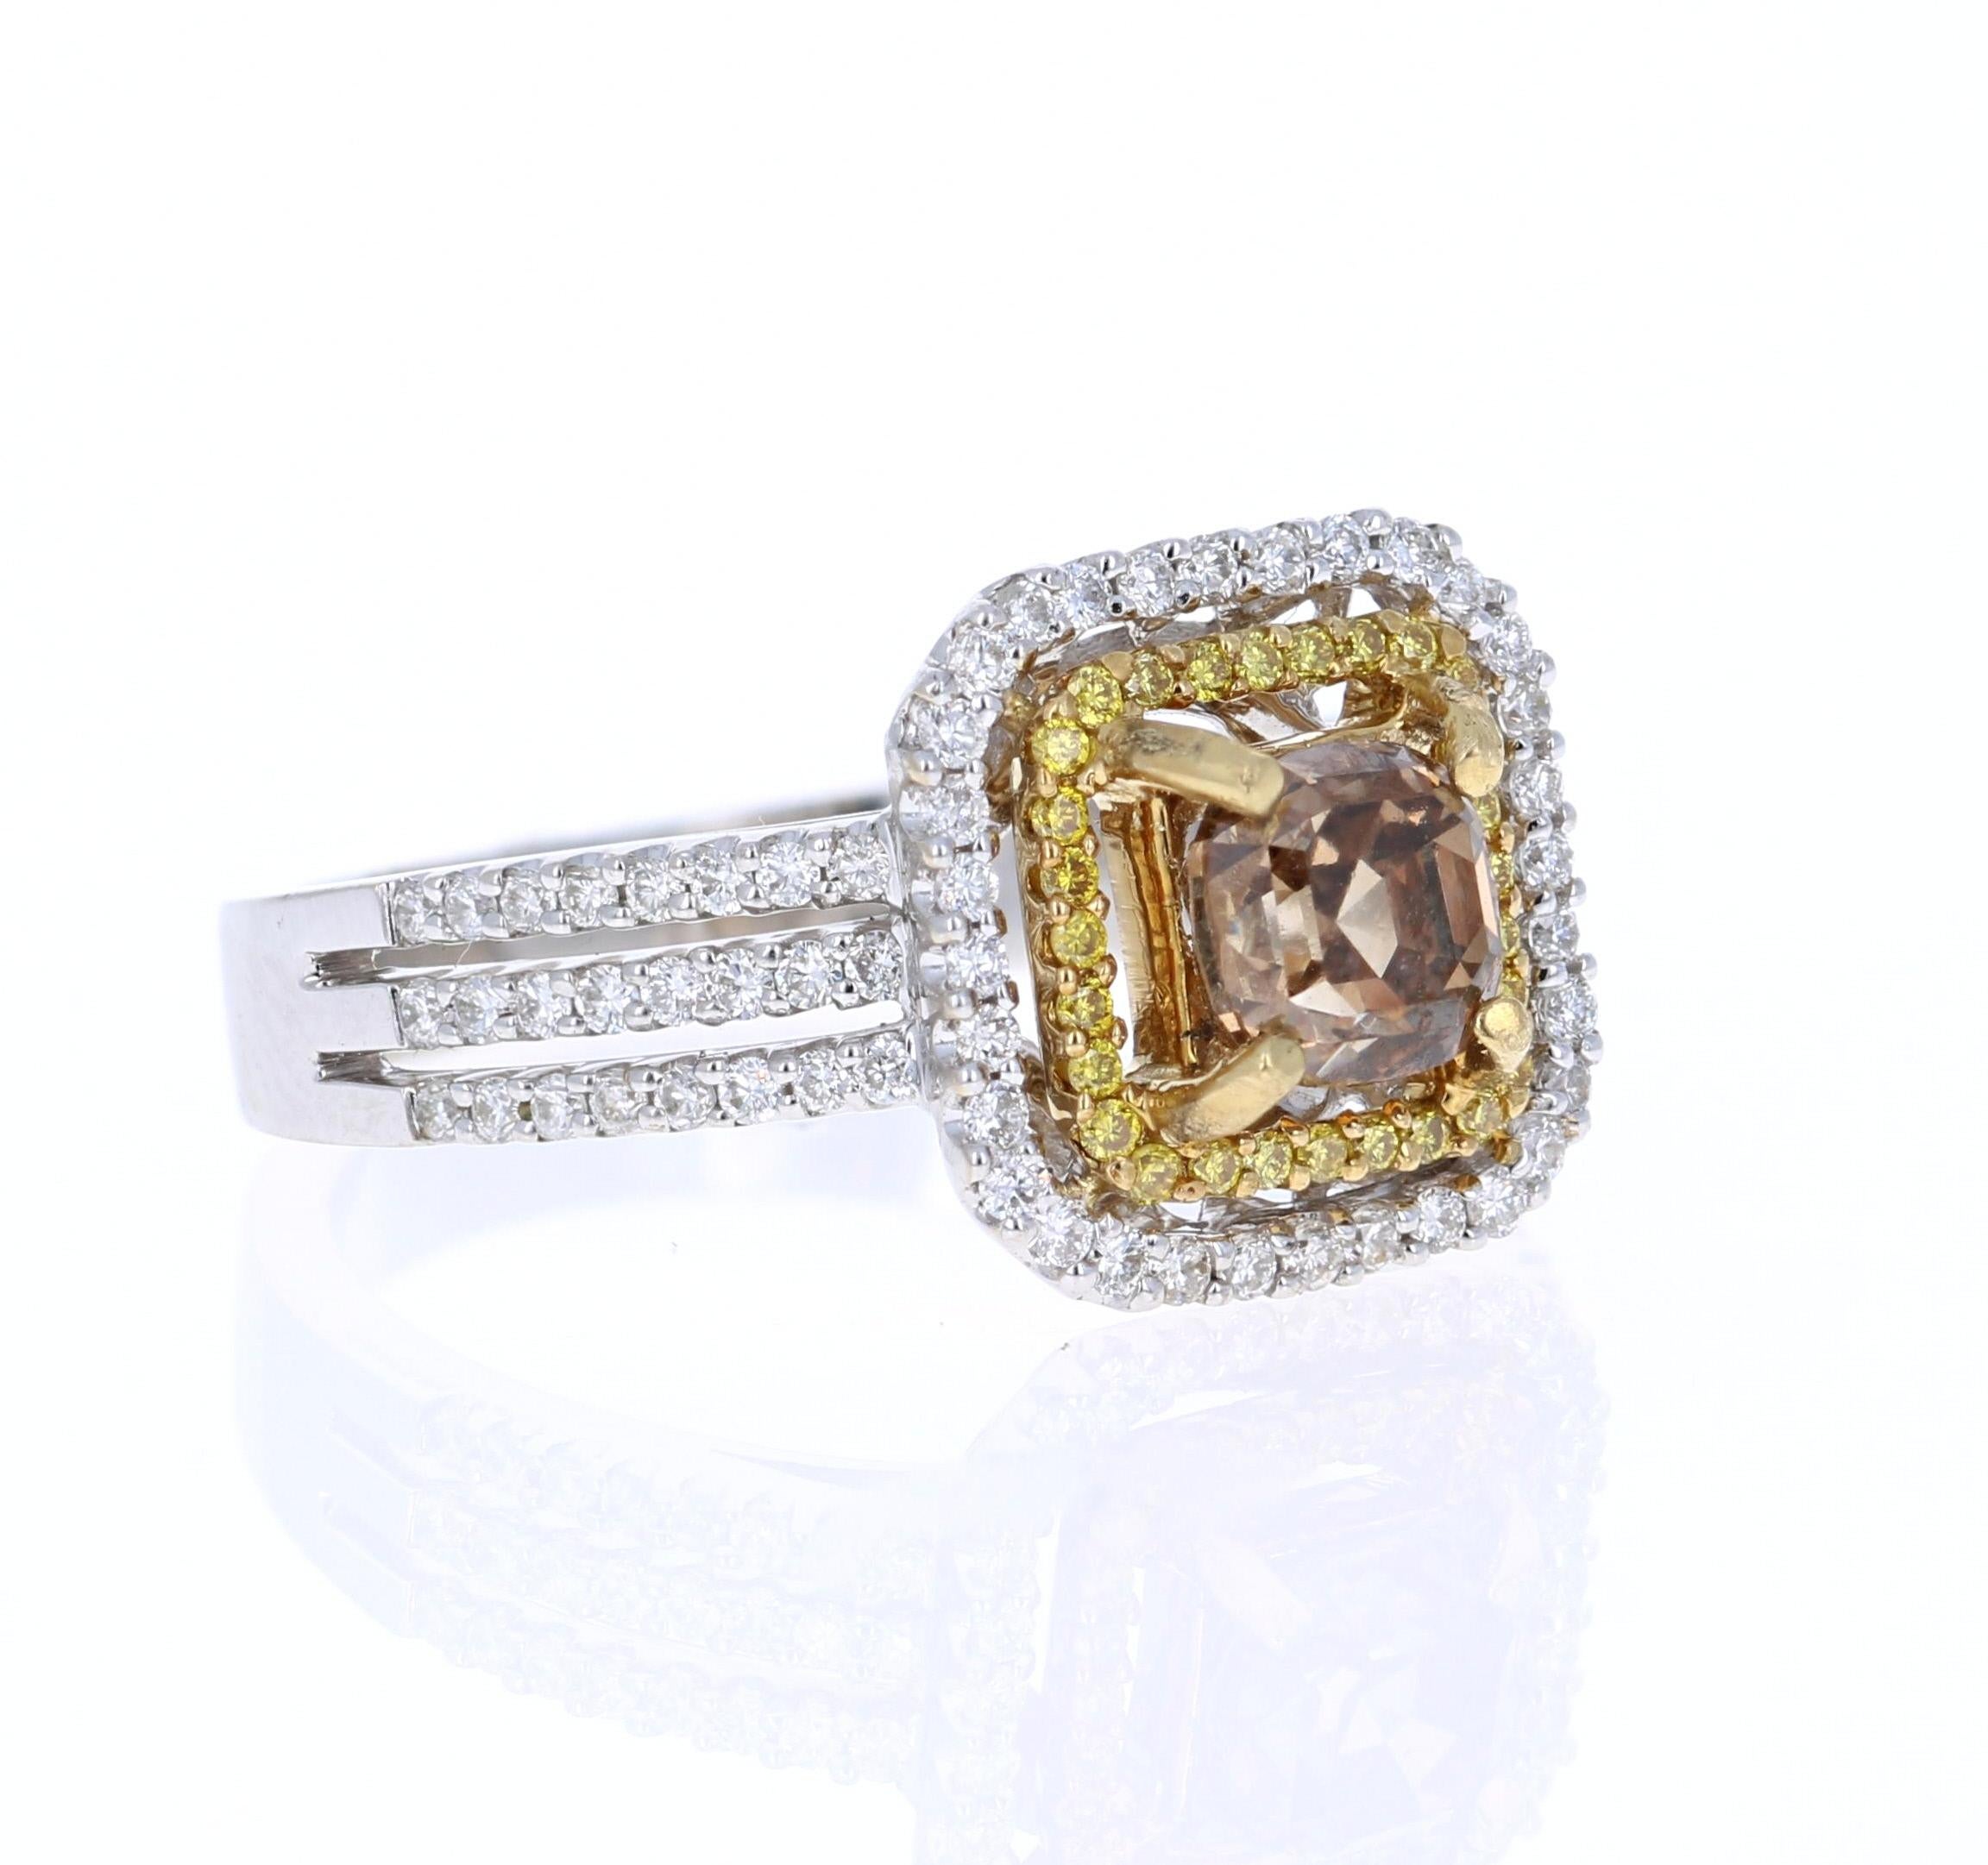 This ring has a 1.03 Carat Asscher Cut Natural Champagne Diamond Clarity (SI1) which is surrounded by 88 Round Cut Diamonds that weigh 0.45 Carats and also 28 Yellow Diamonds that weigh 0.15 Carats. The total carat weight of the ring is 1.63 Carats.